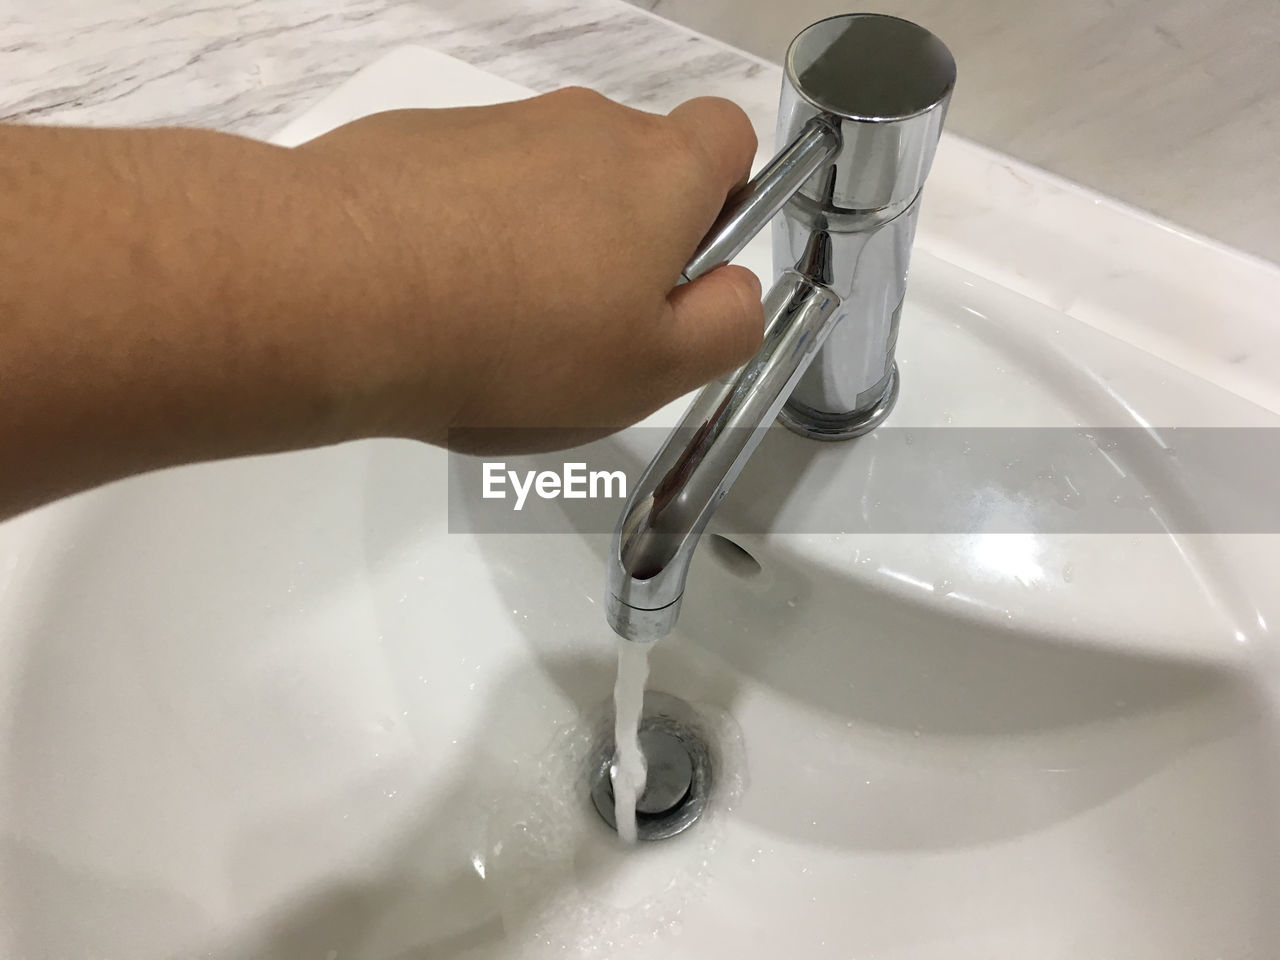 Cropped hand using faucet in bathroom